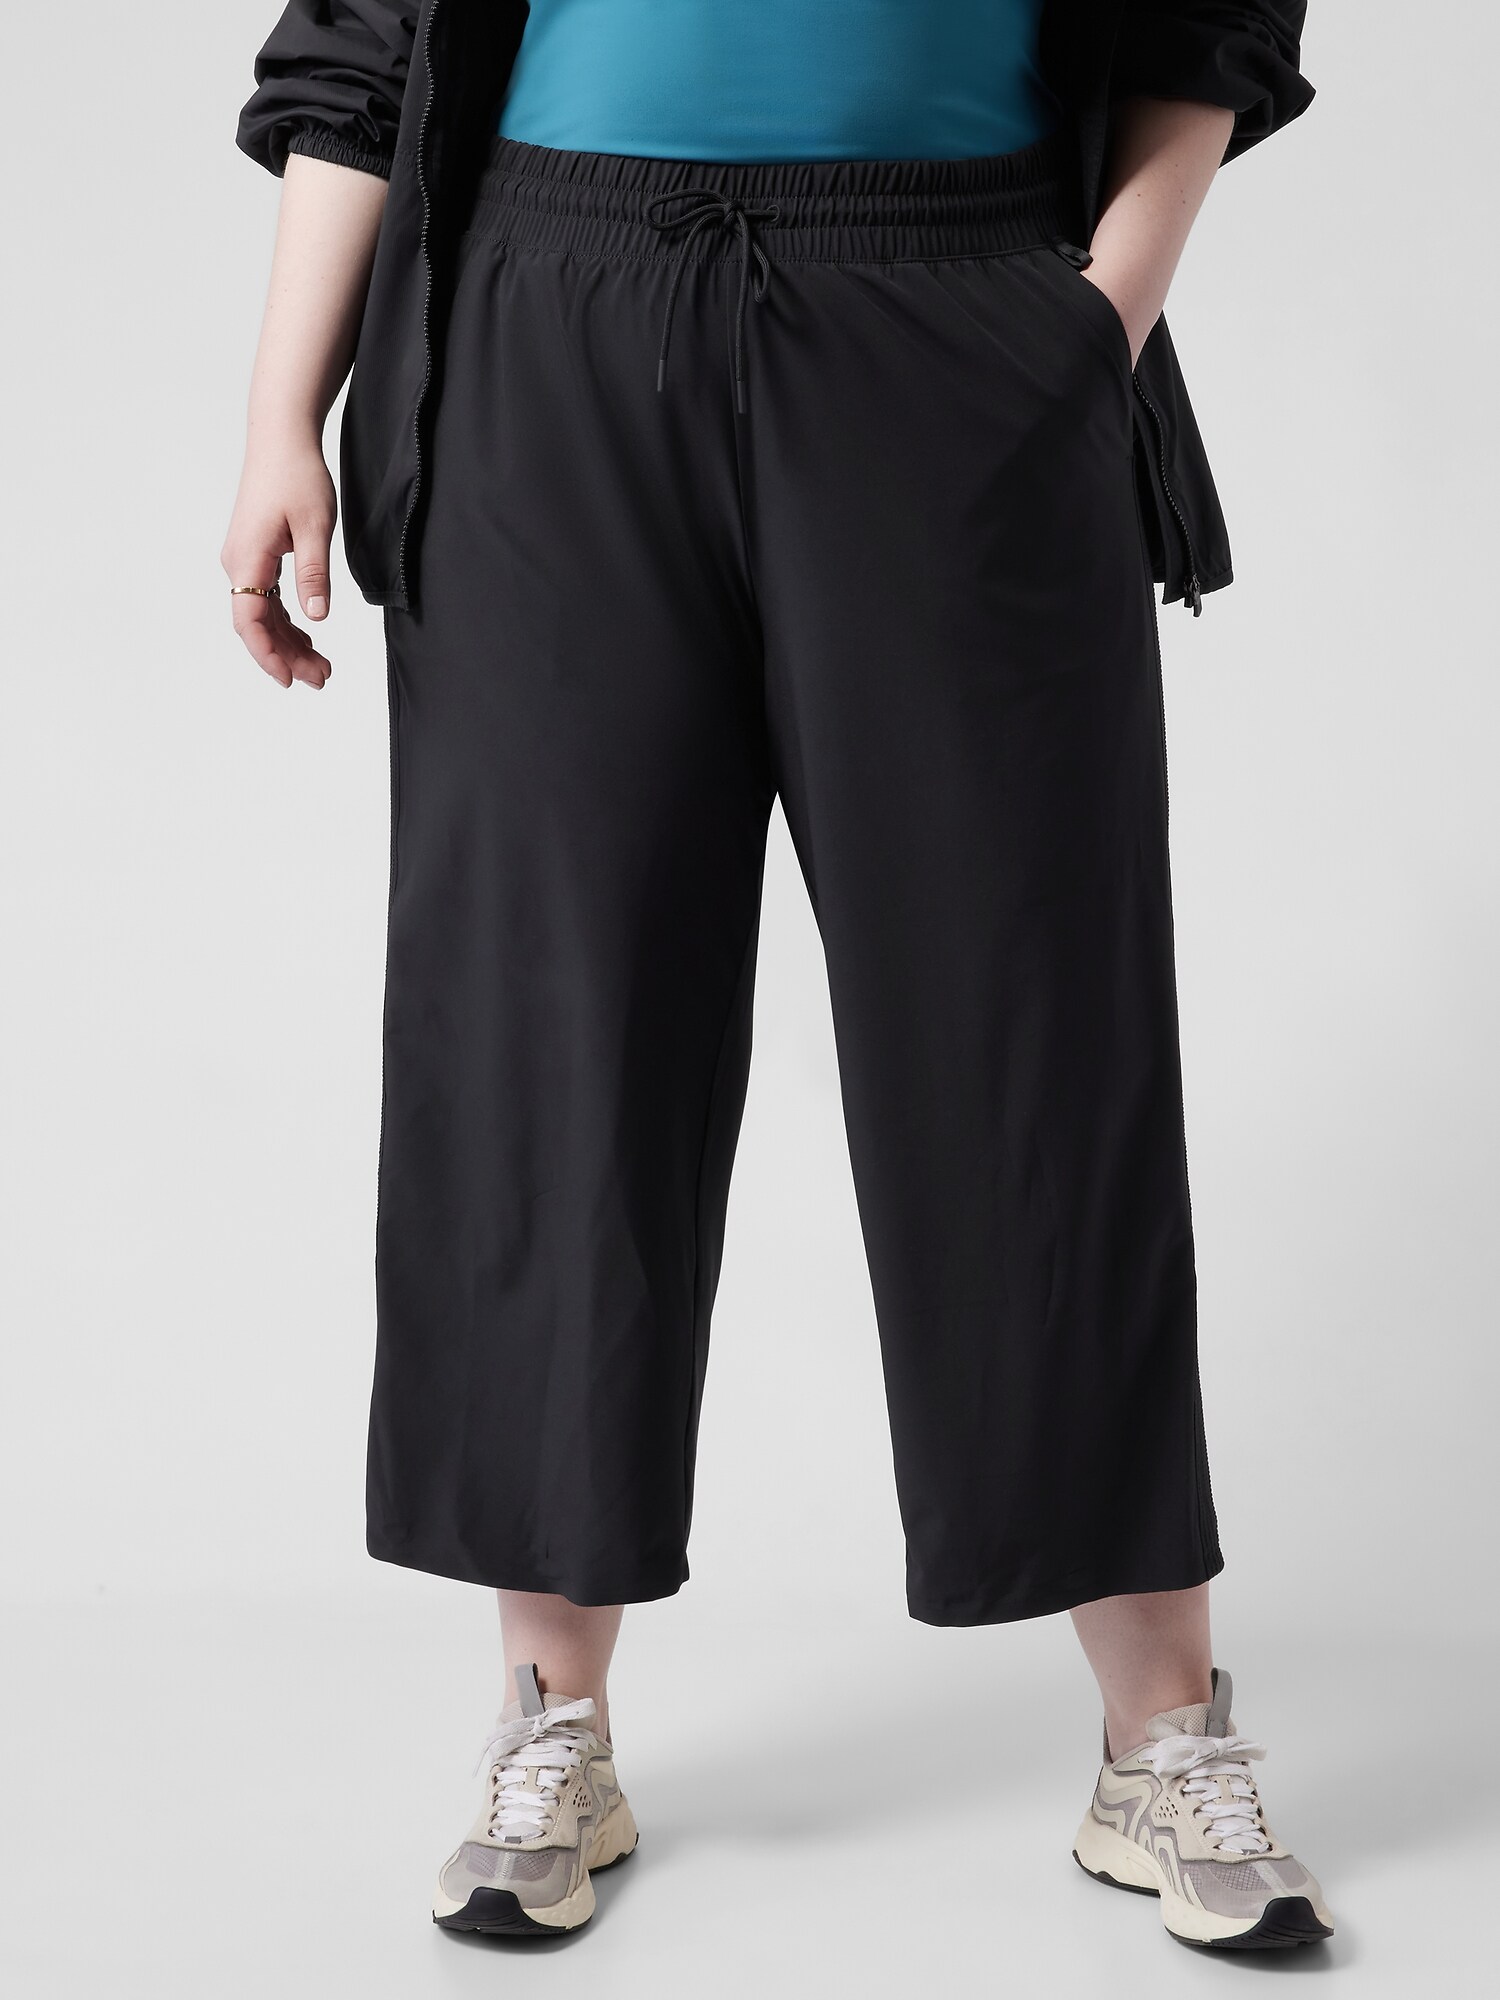 LULULEMON On the Fly Wide-Leg Pant *Woven-Black. Size 6 Crop